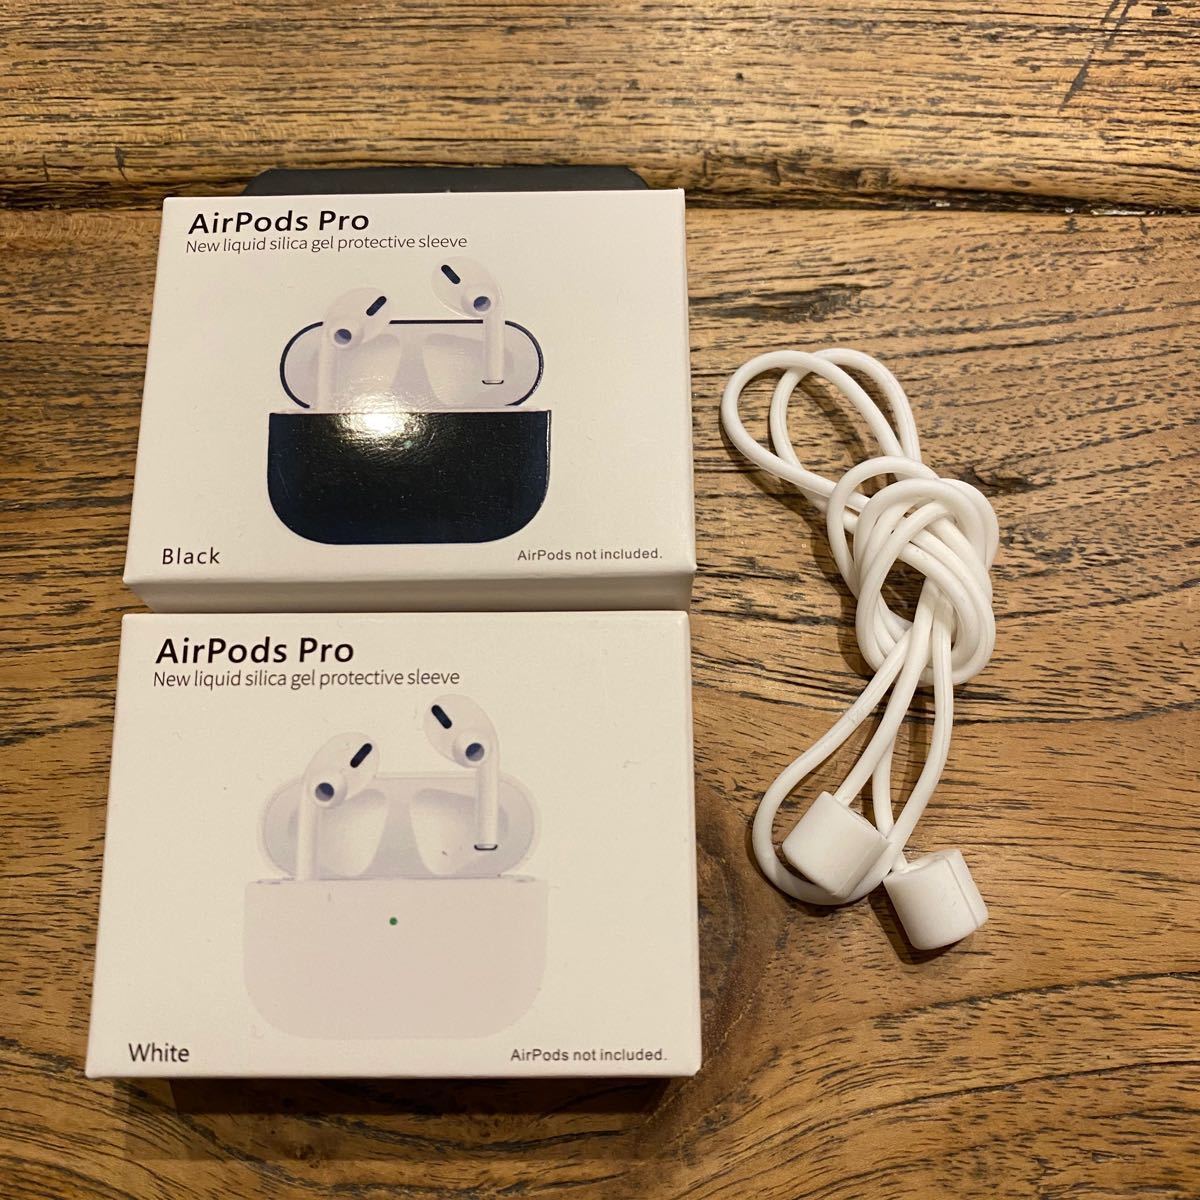 PayPayフリマ｜最短明日着 本日25日当日便 保証付き 新品AirPods Pro 